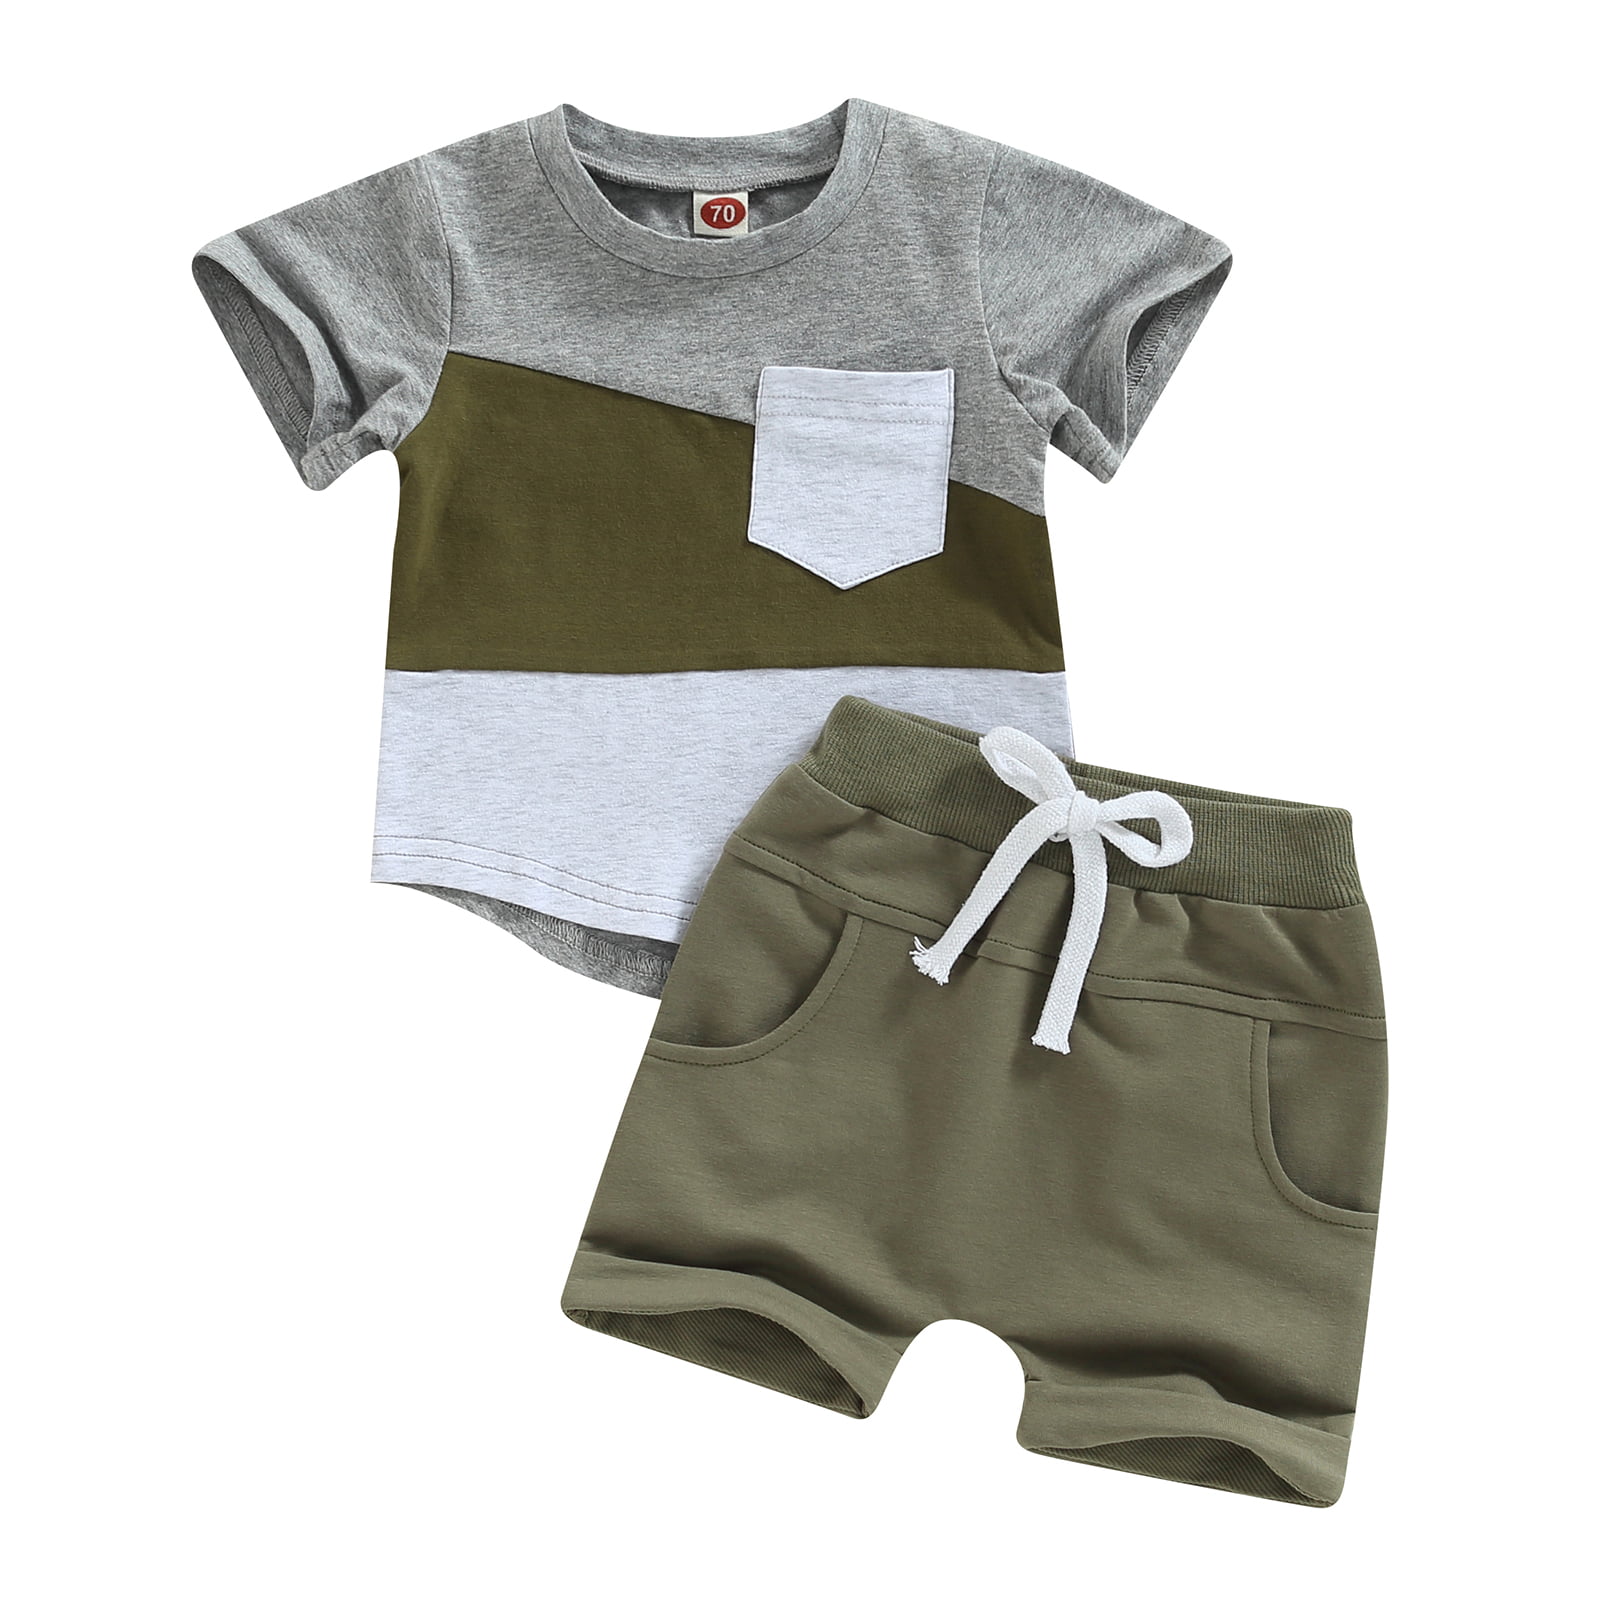 2pcs Toddler Boy Casual Letter Print Colorblock Tee and Shorts Set